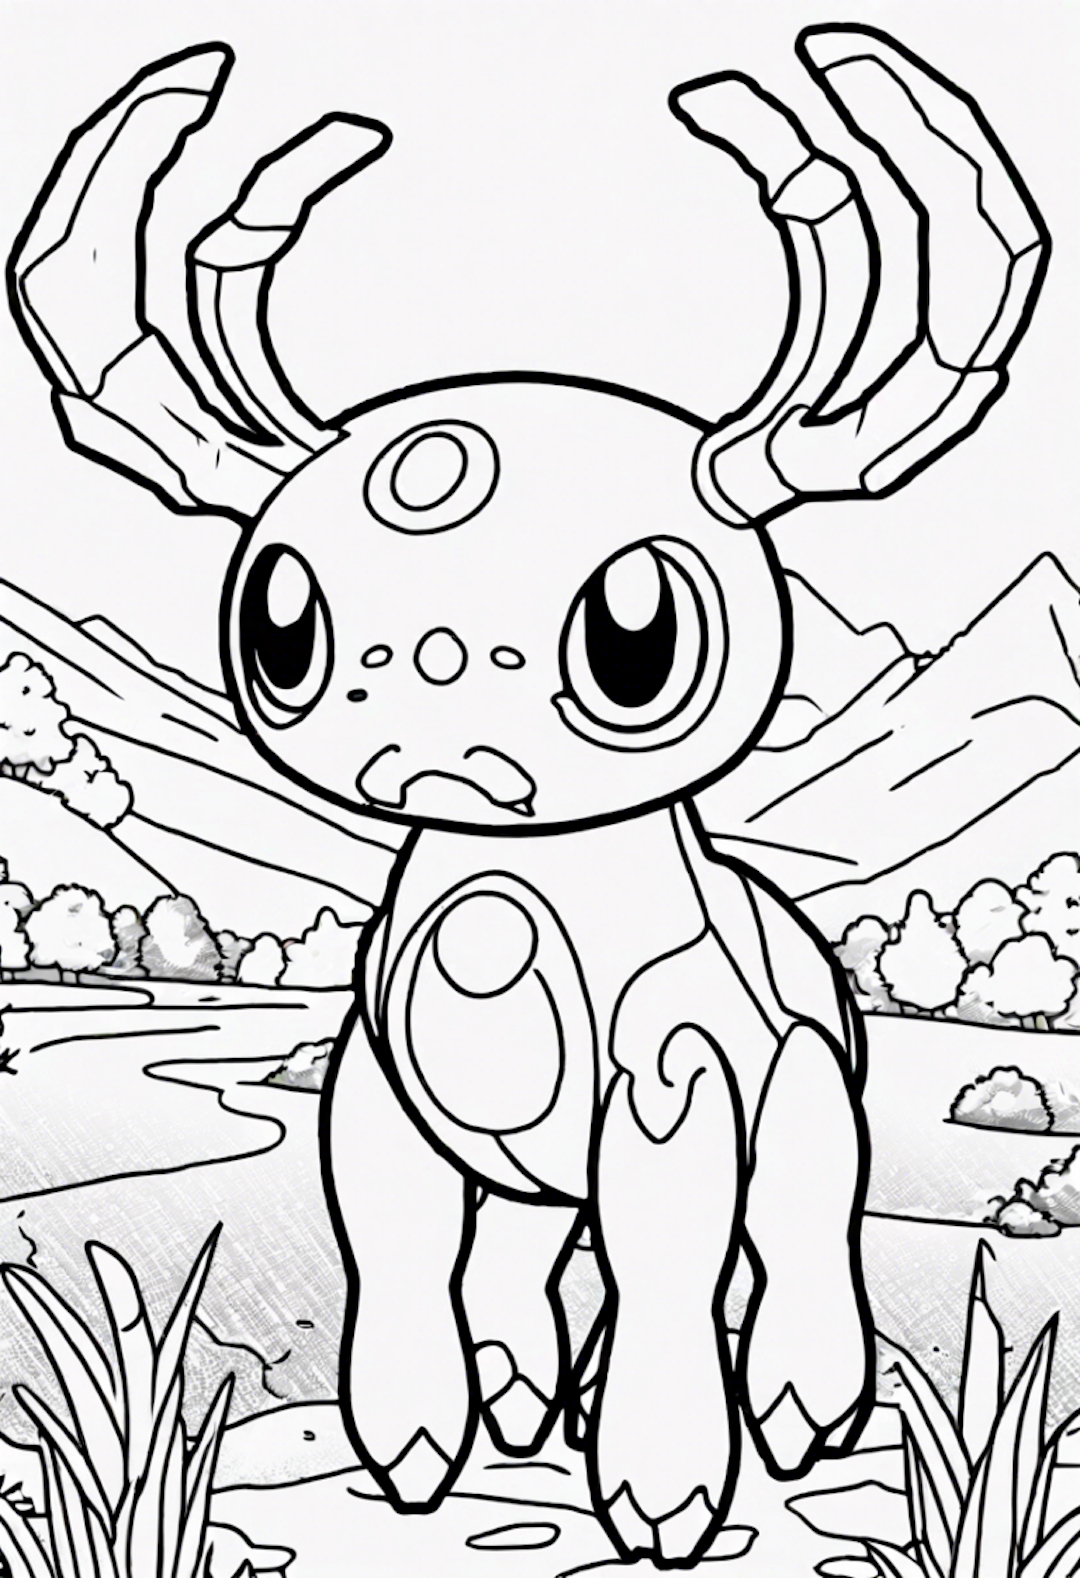 Pinsir coloring pages